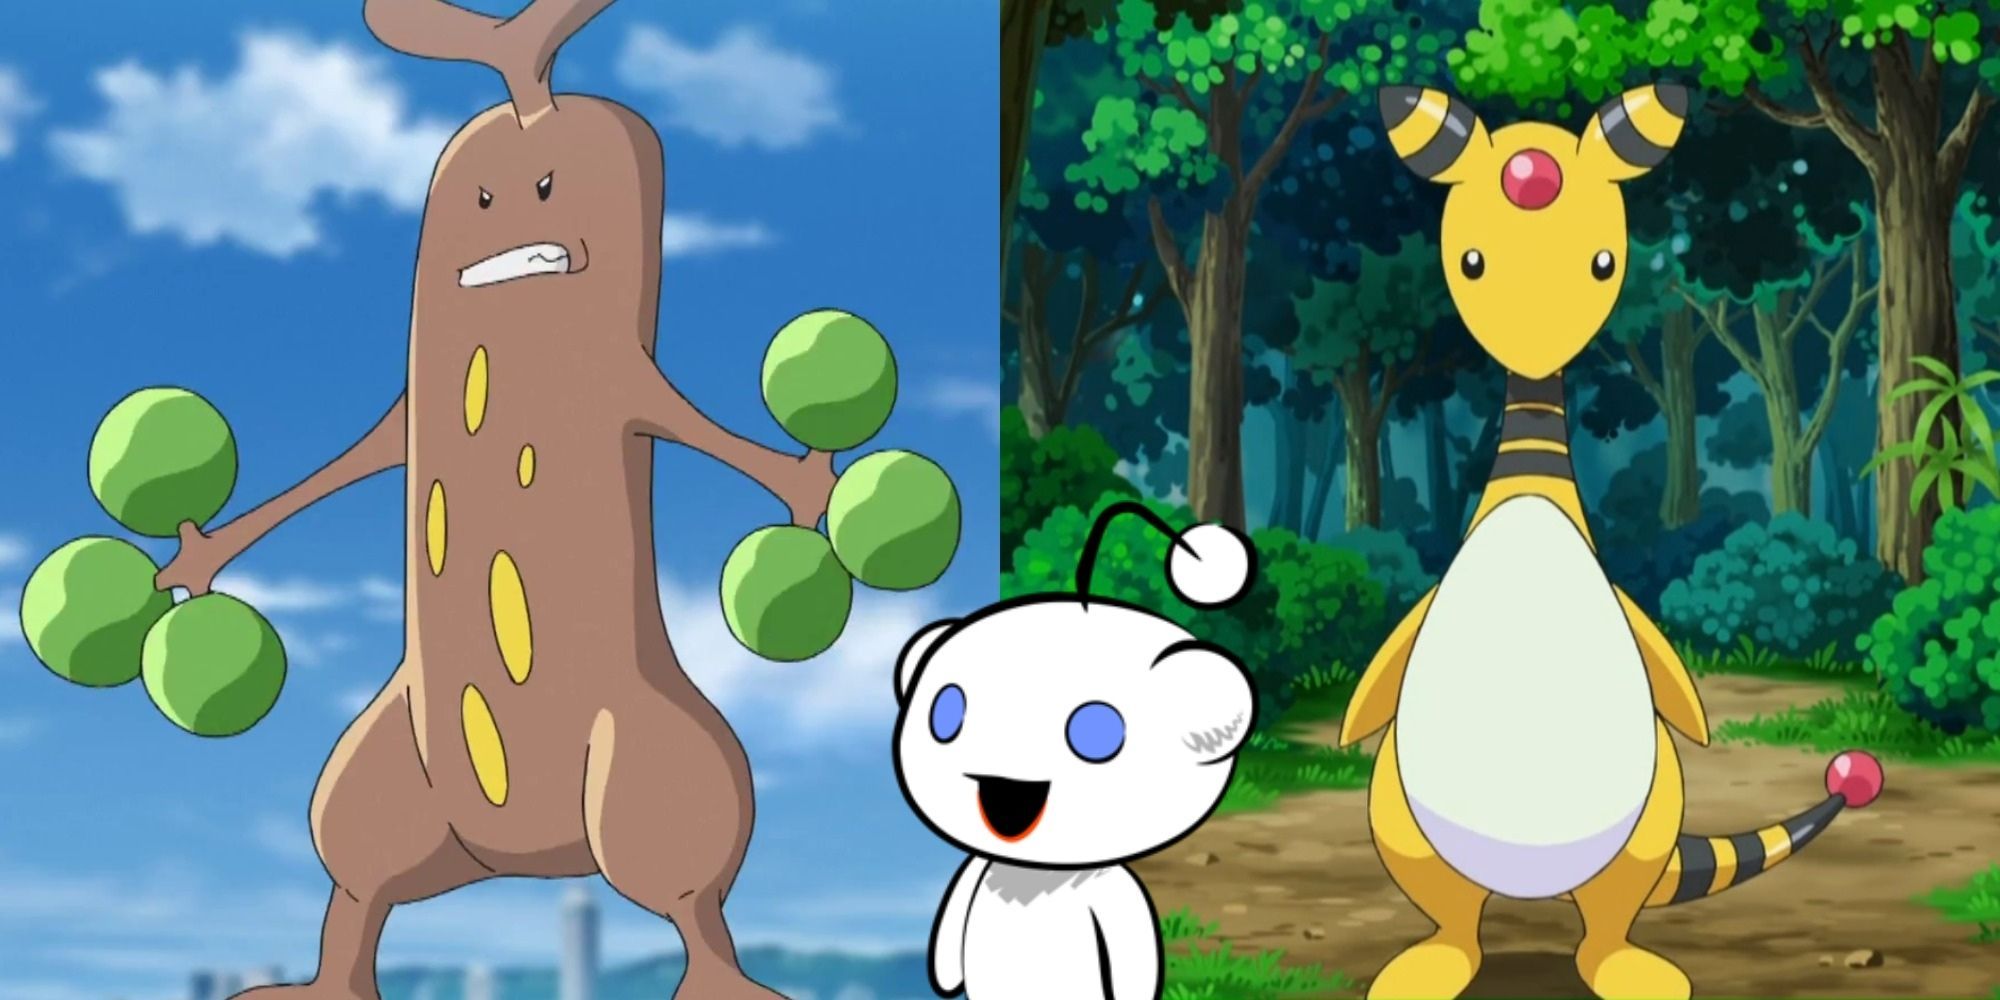 Split image showing Sudowoodo and Ampharos in the Pokémon anime, and Snoo from Reddit